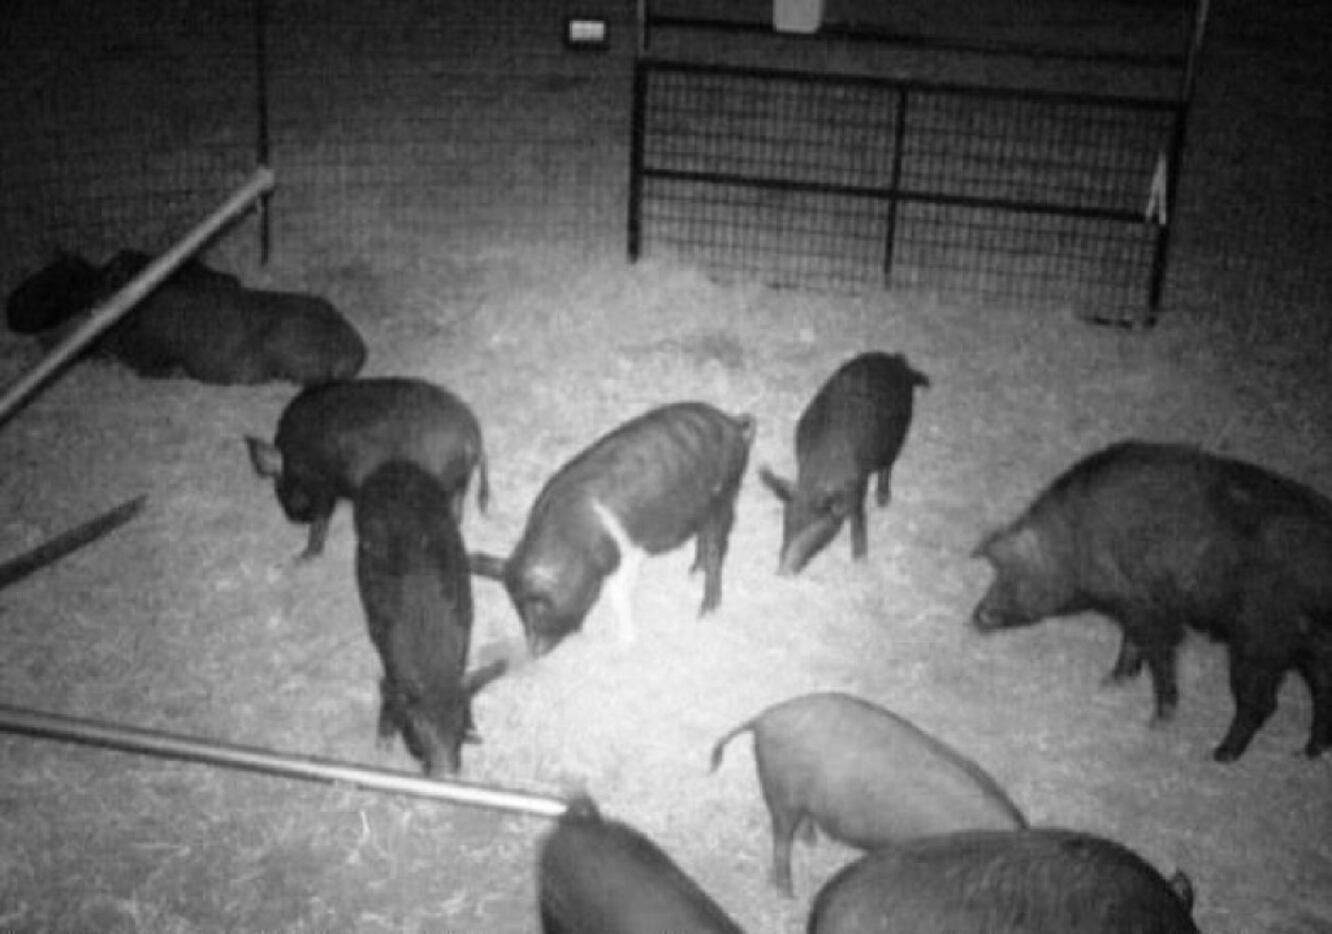 The city's new trapping program includes cameras that record the moment feral hogs are trapped.